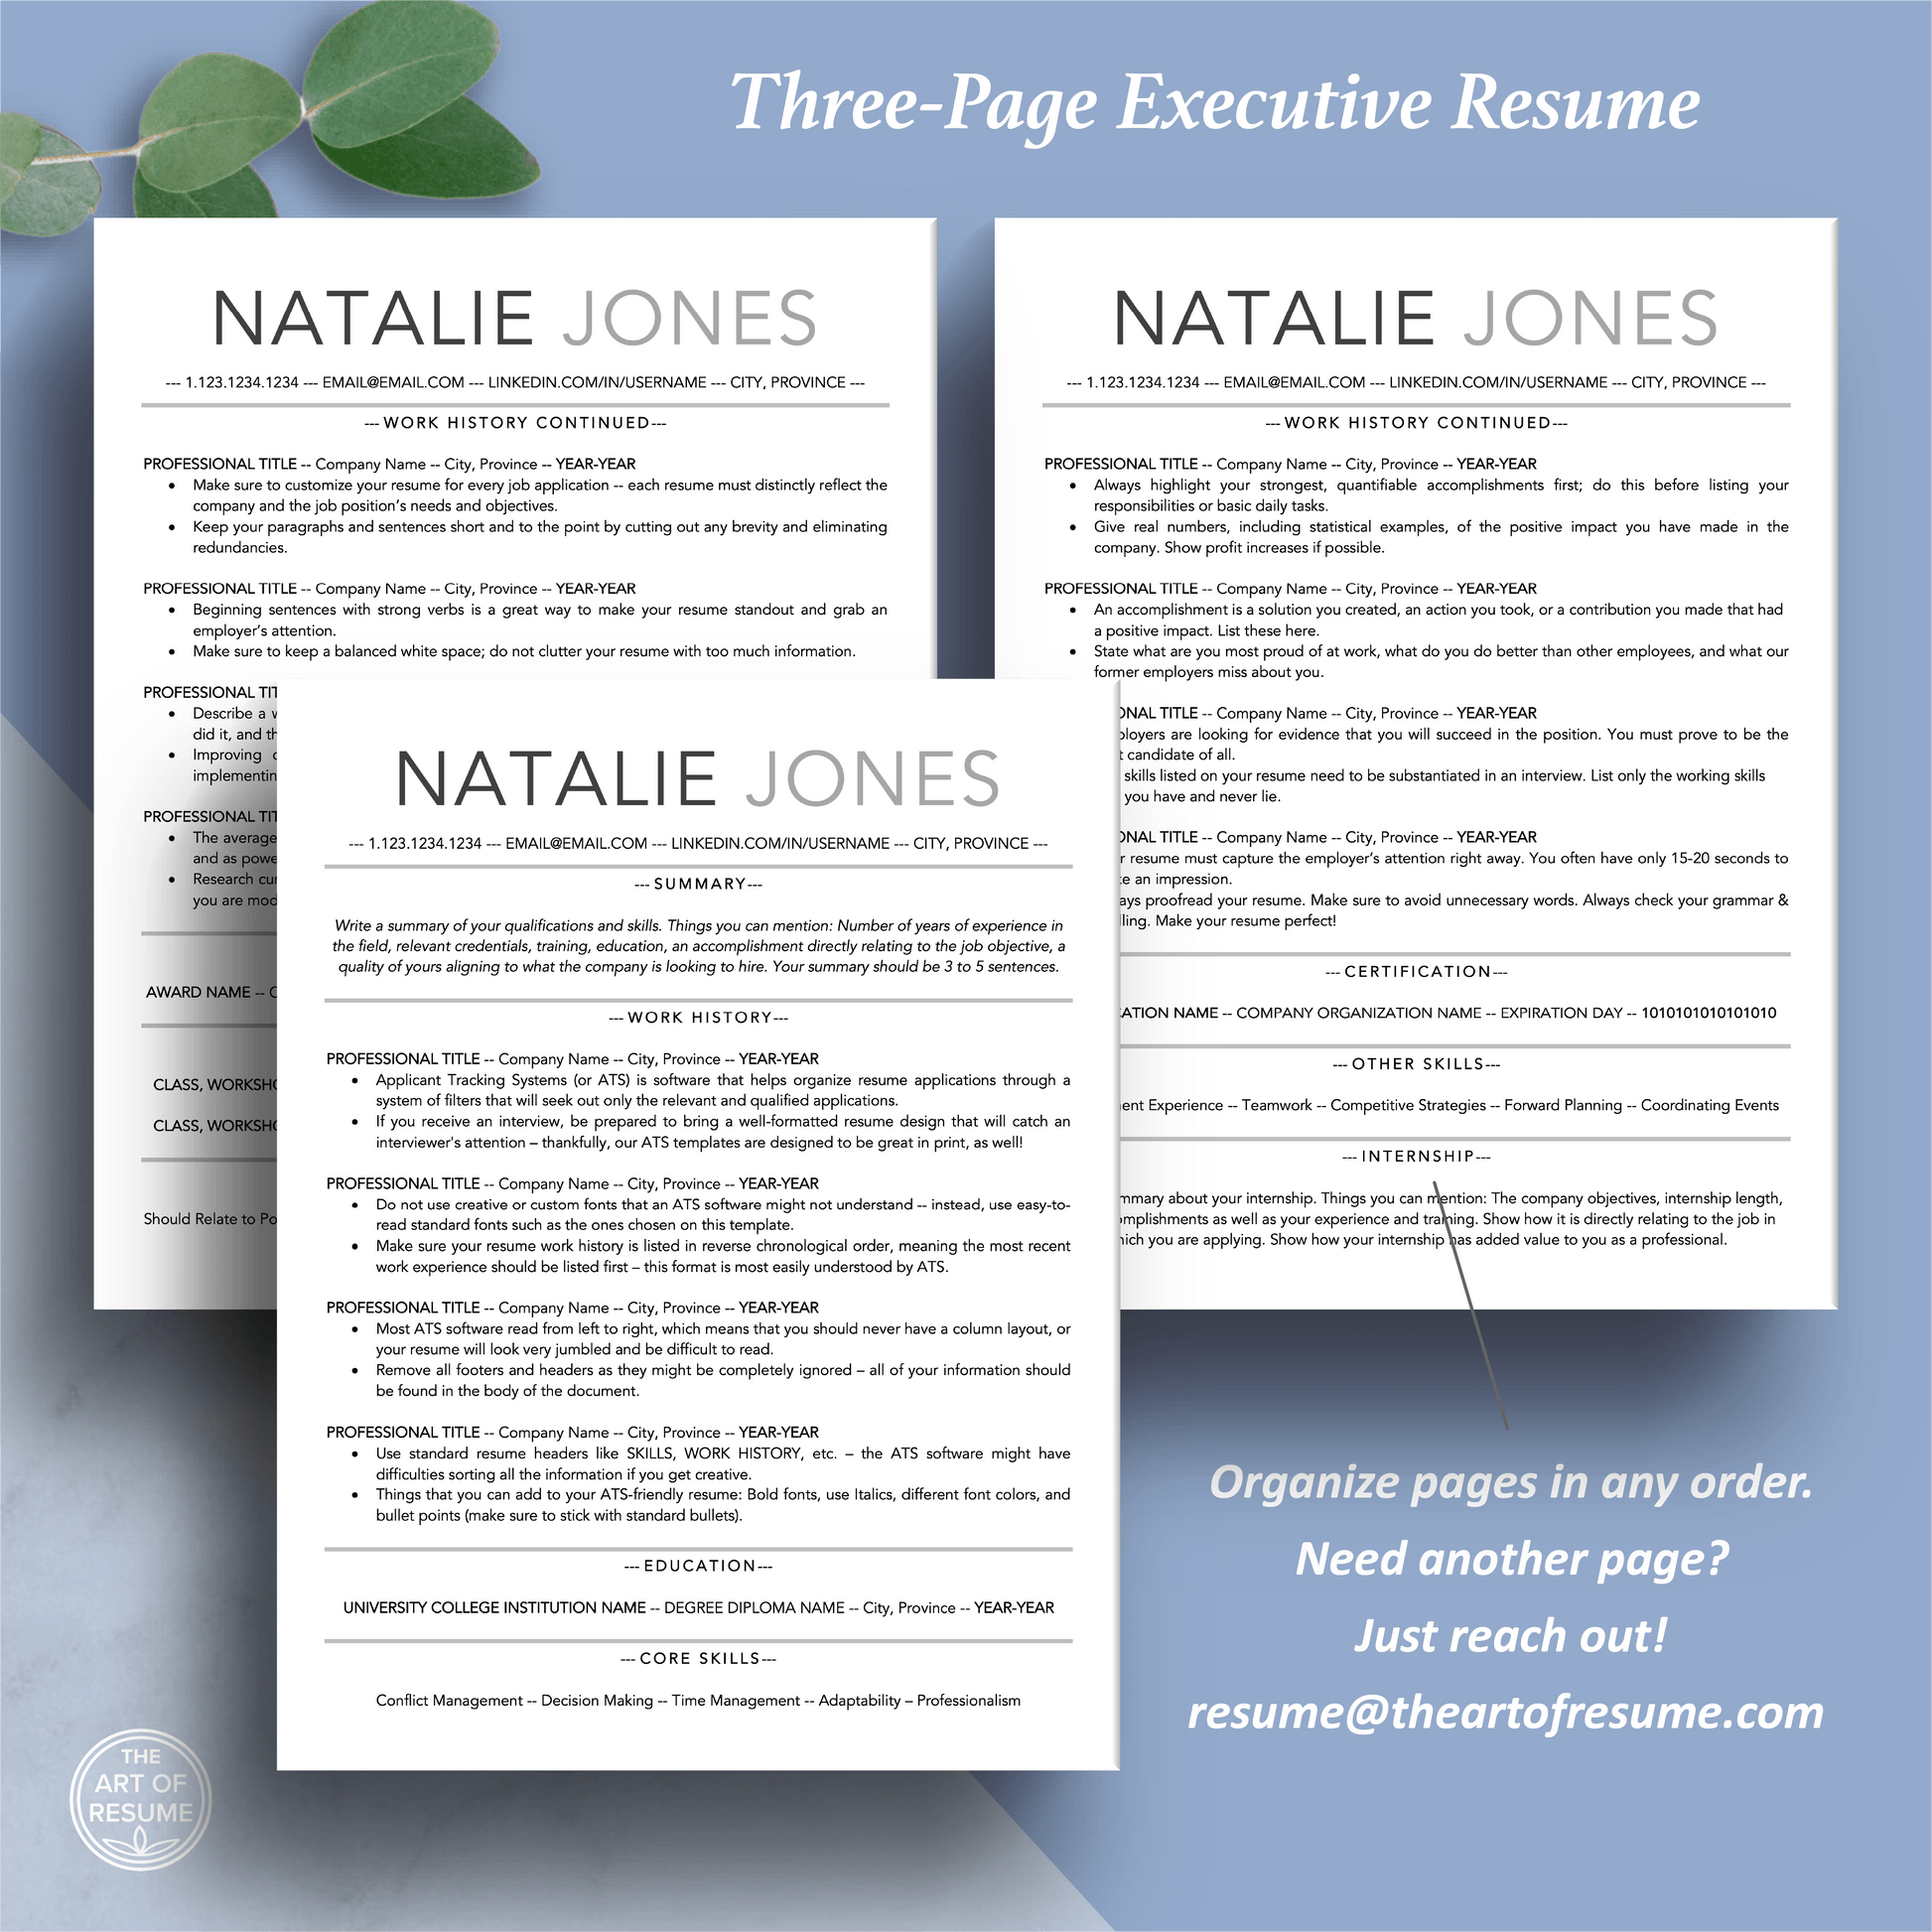 ATS-Friendly Resume | Modern CV Template | FREE Resume Guide - The Art of Resume